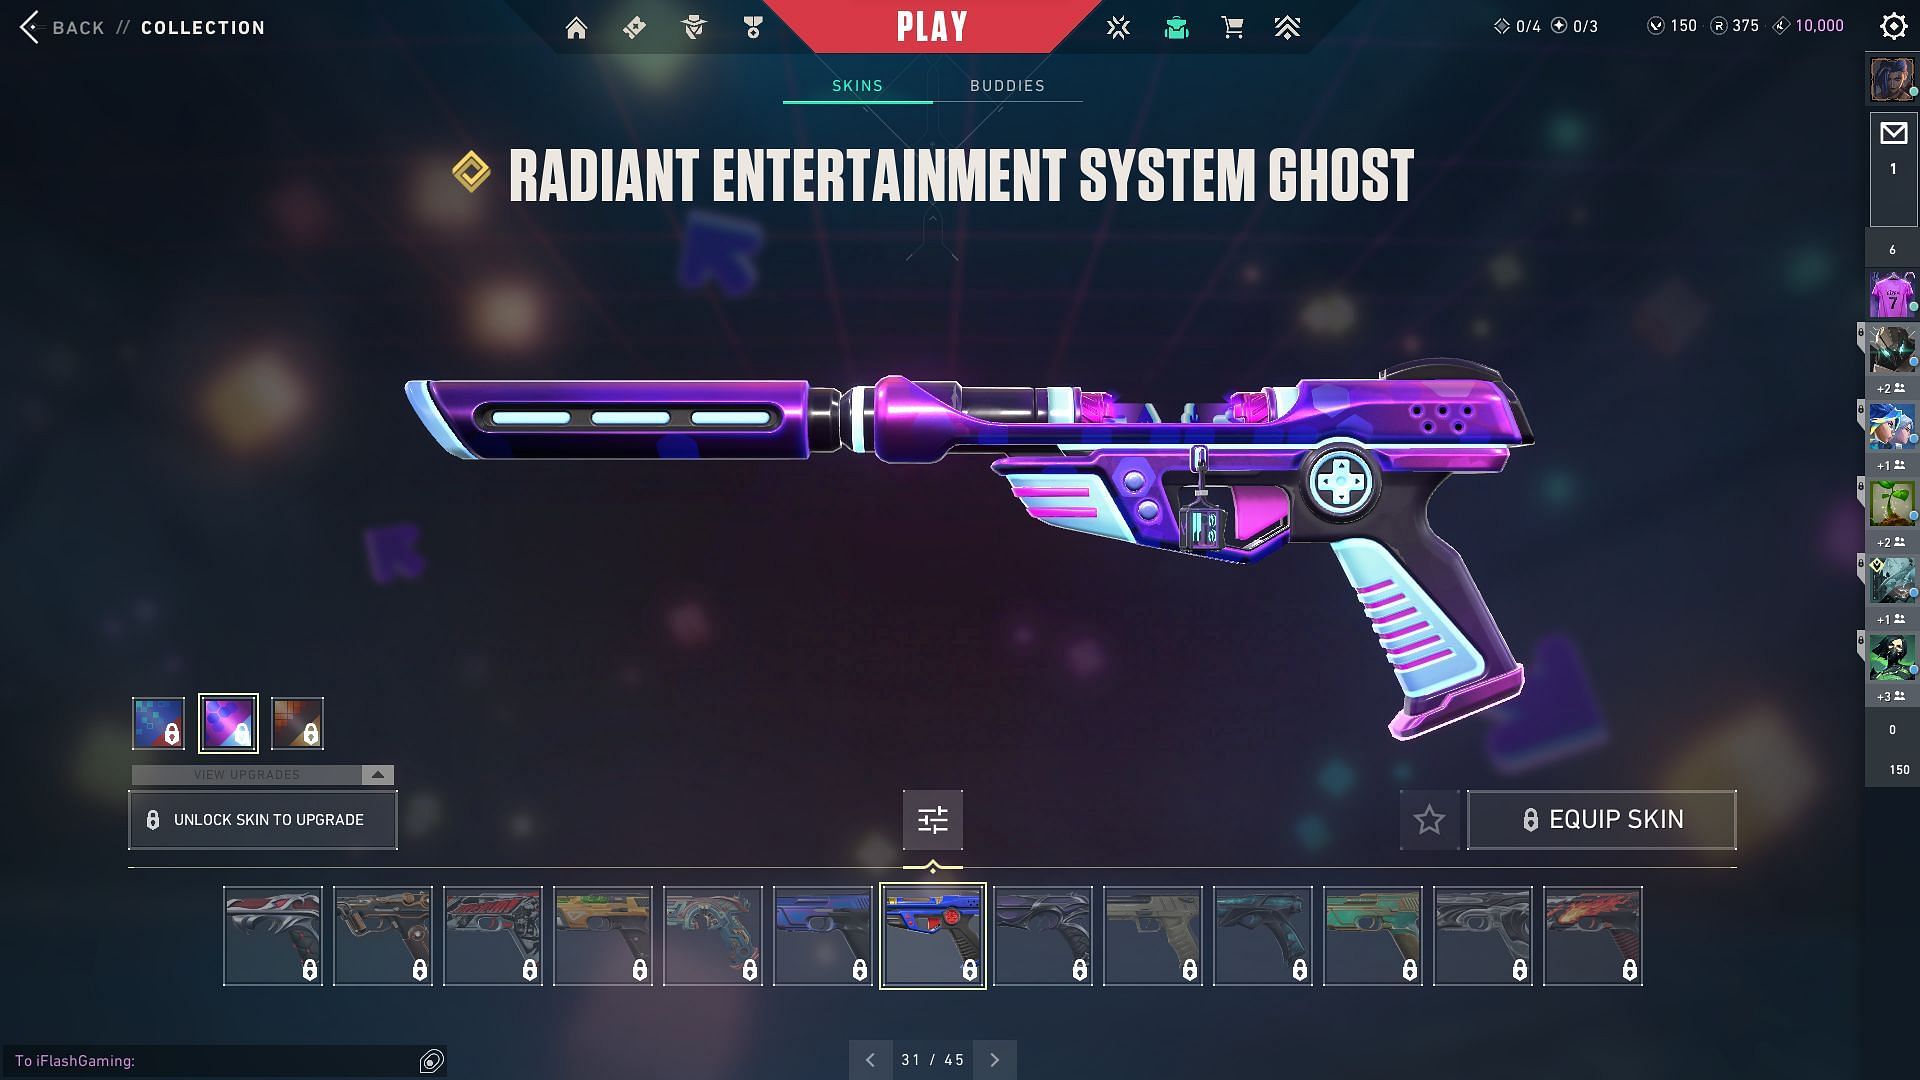 Radiant Entertainment System Ghost in Valorant (Image via Riot)